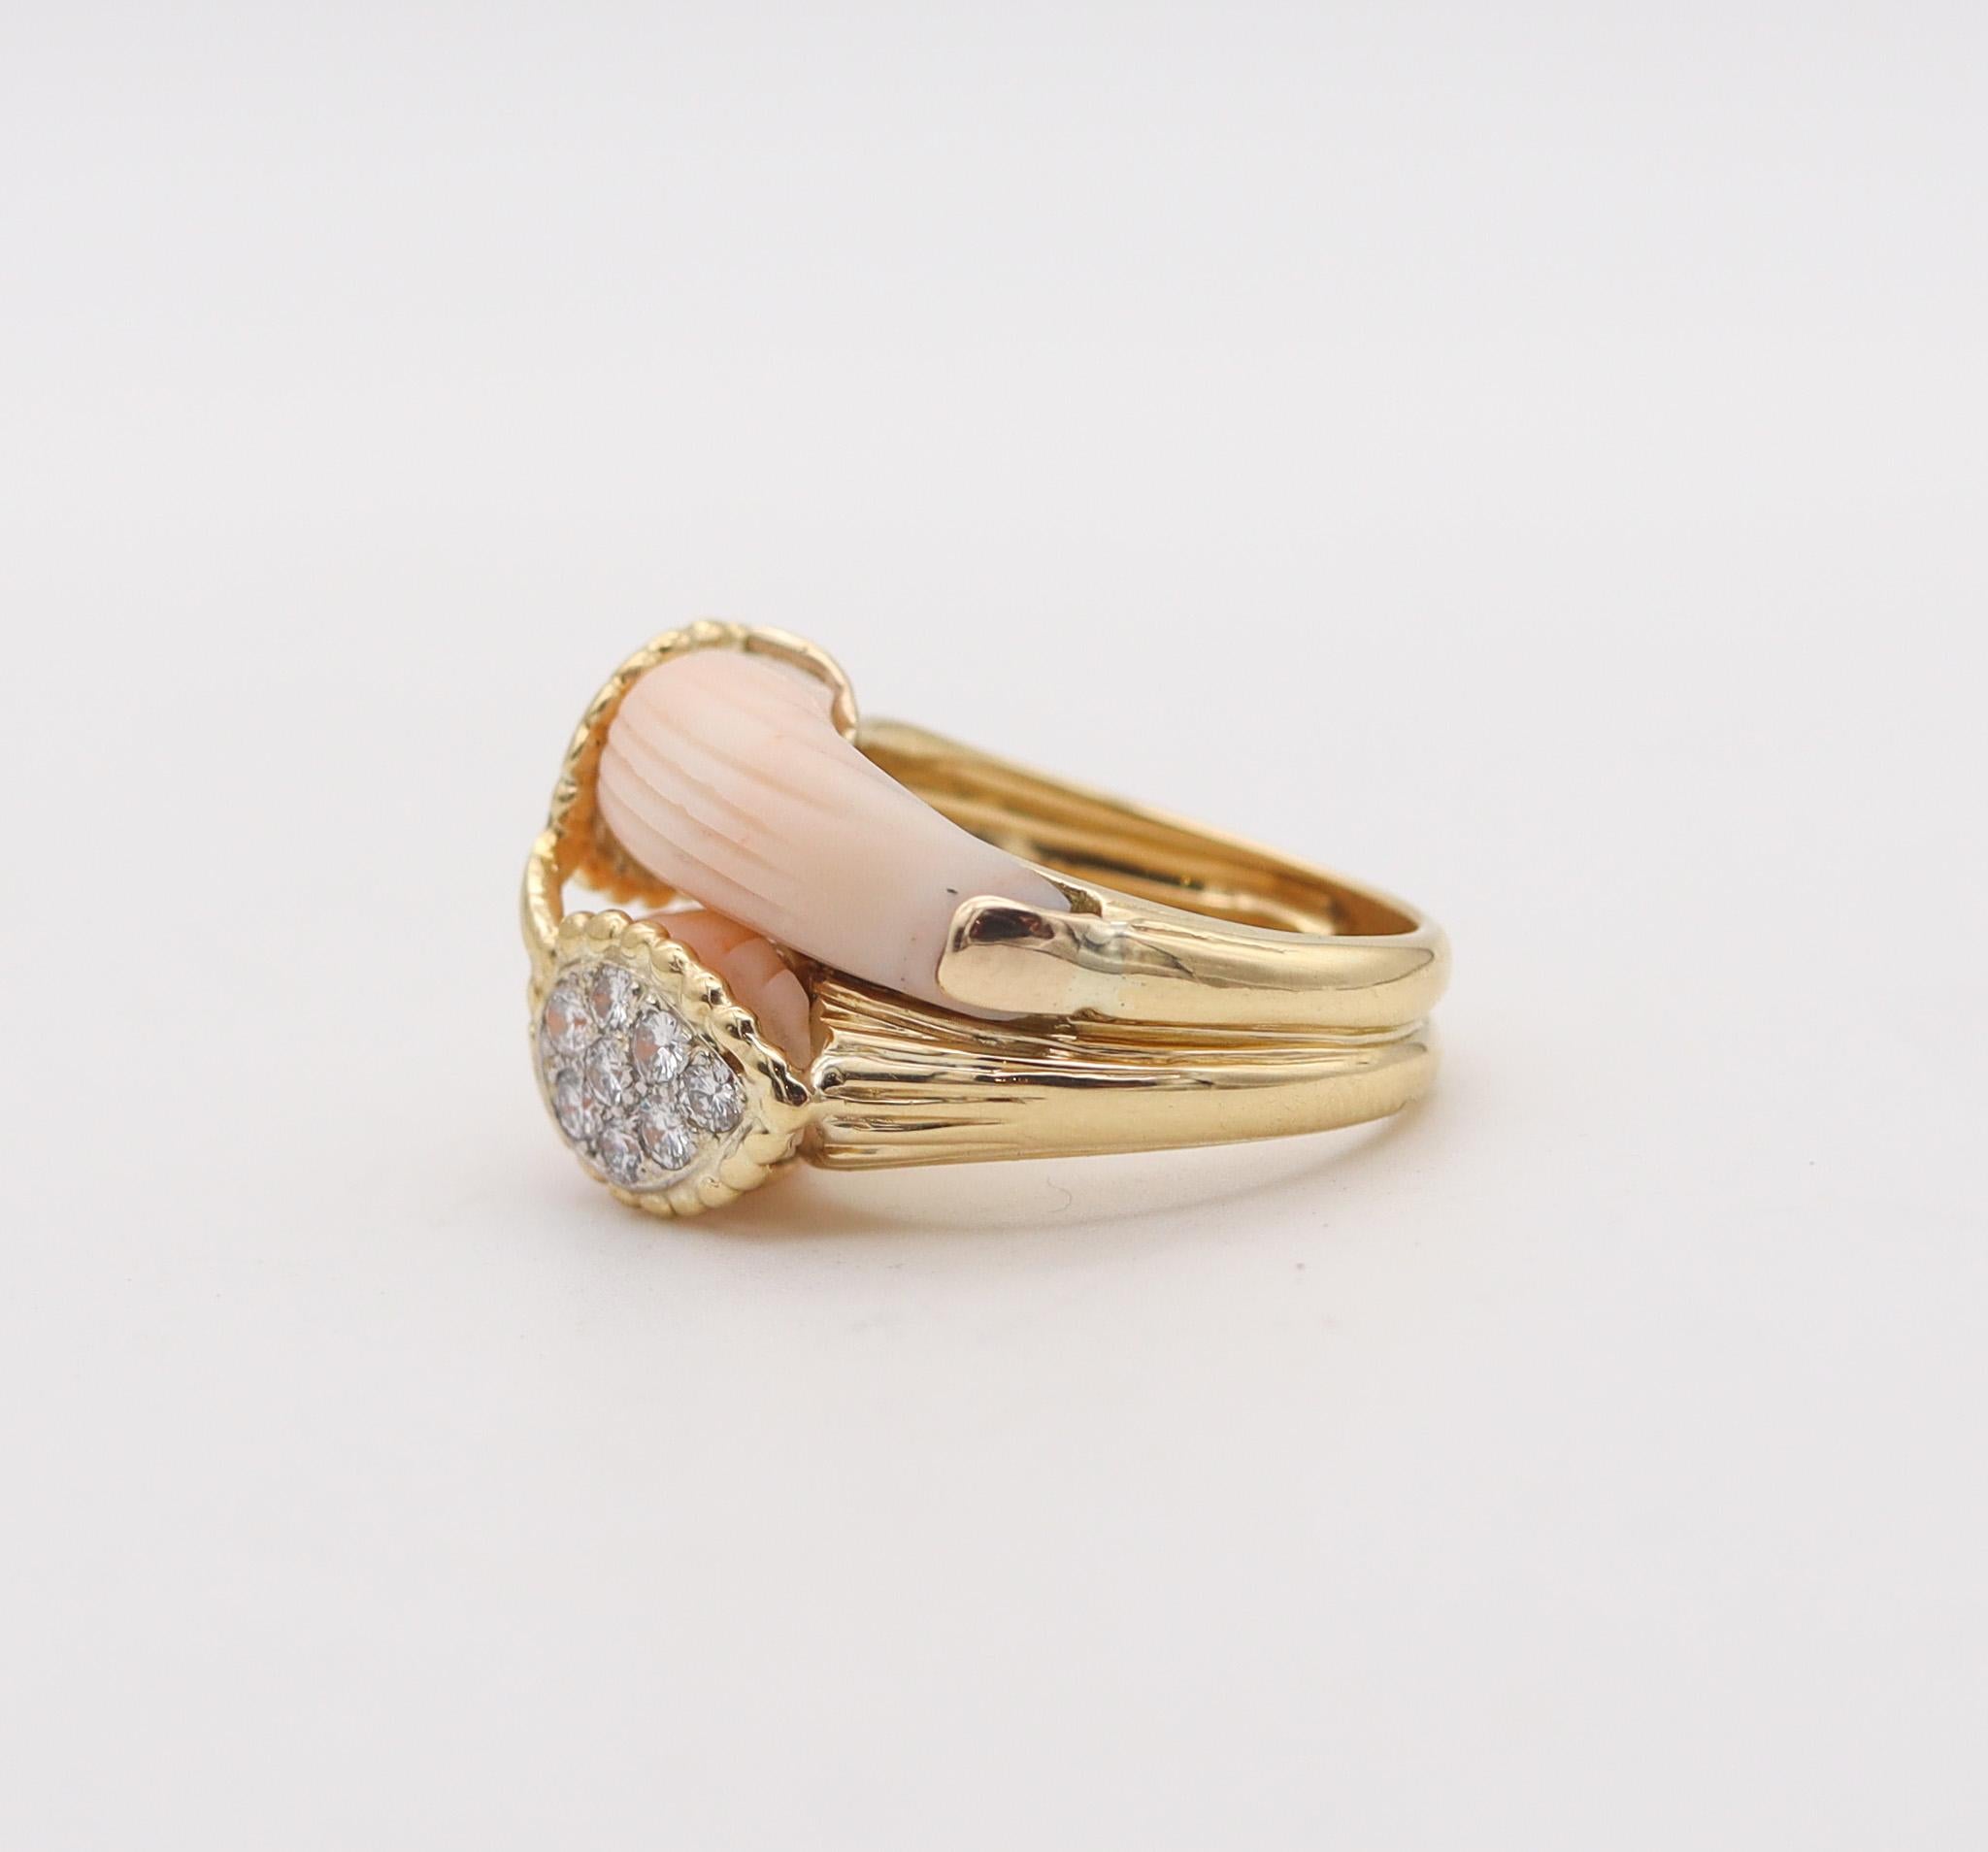 Modernist Van Cleef & Arpels 1970 Paris Double Corals Ring In 18Kt Gold With VS Diamonds For Sale